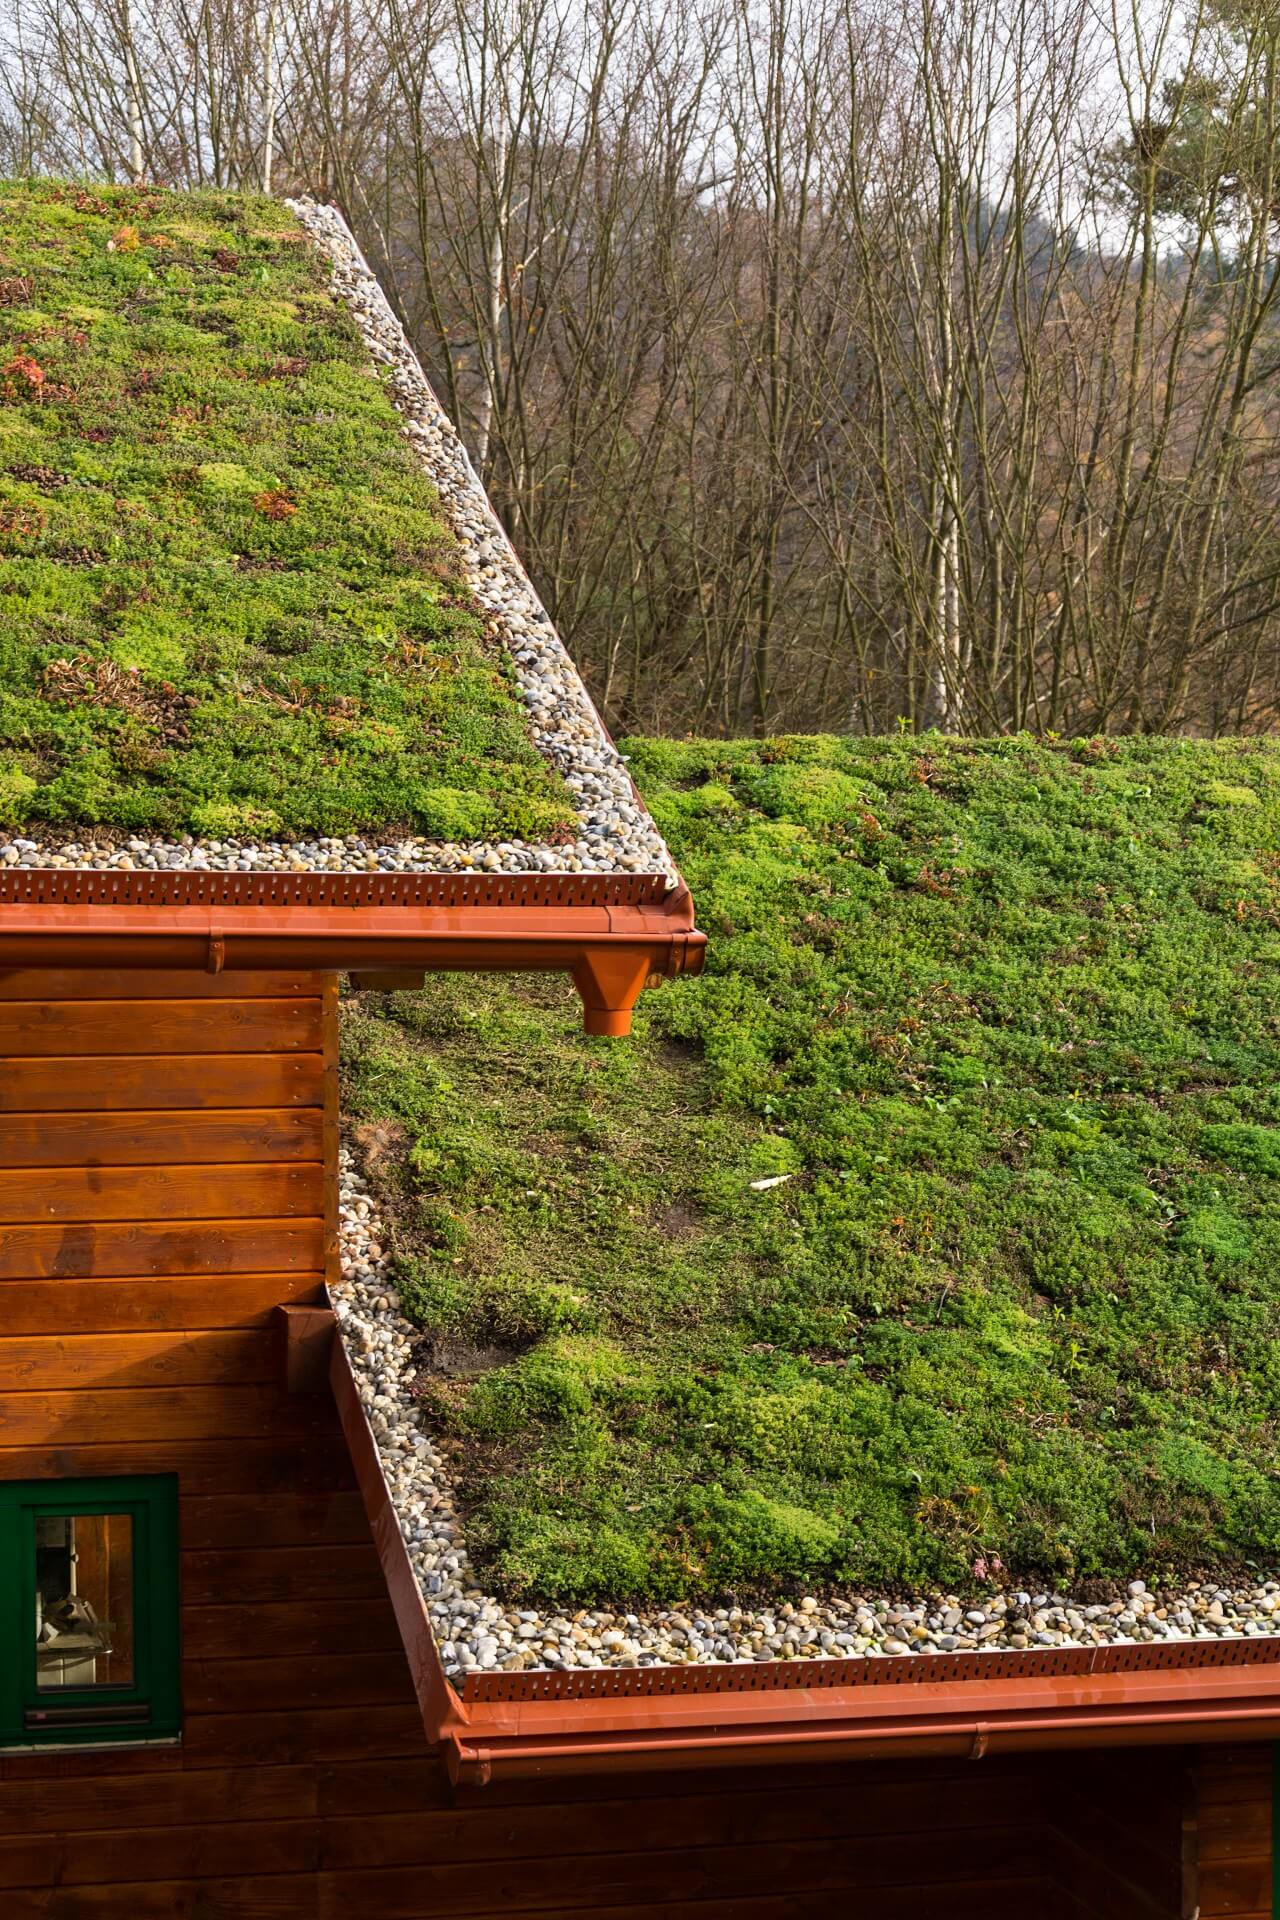 green-living-roof-wooden-building-covered-with-vegetation(1)